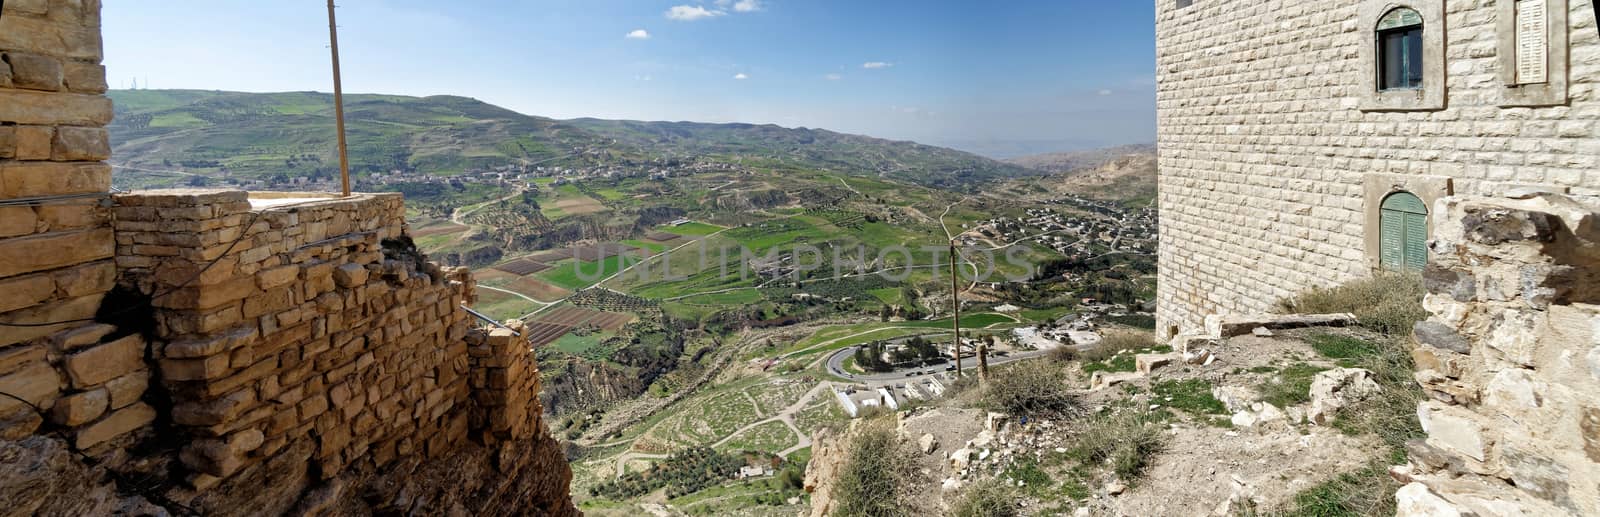 View from the Crusader castle to a small Jordanian village, a suburb of the big city Karak by geogif